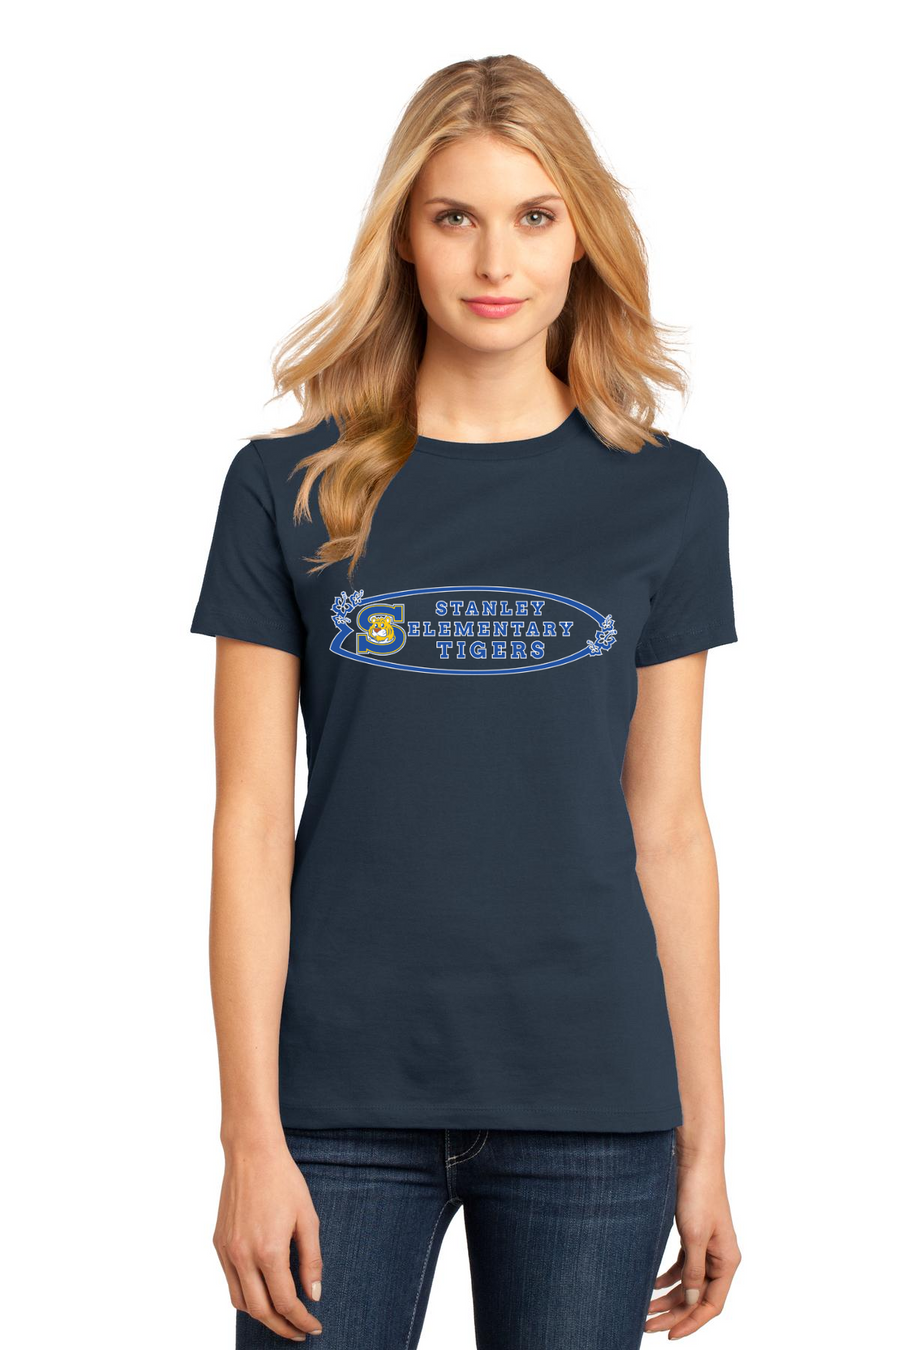 The Tiger Store - Stanley Elementary 2023/24-Premium District Womens Tee Surf Board Logo